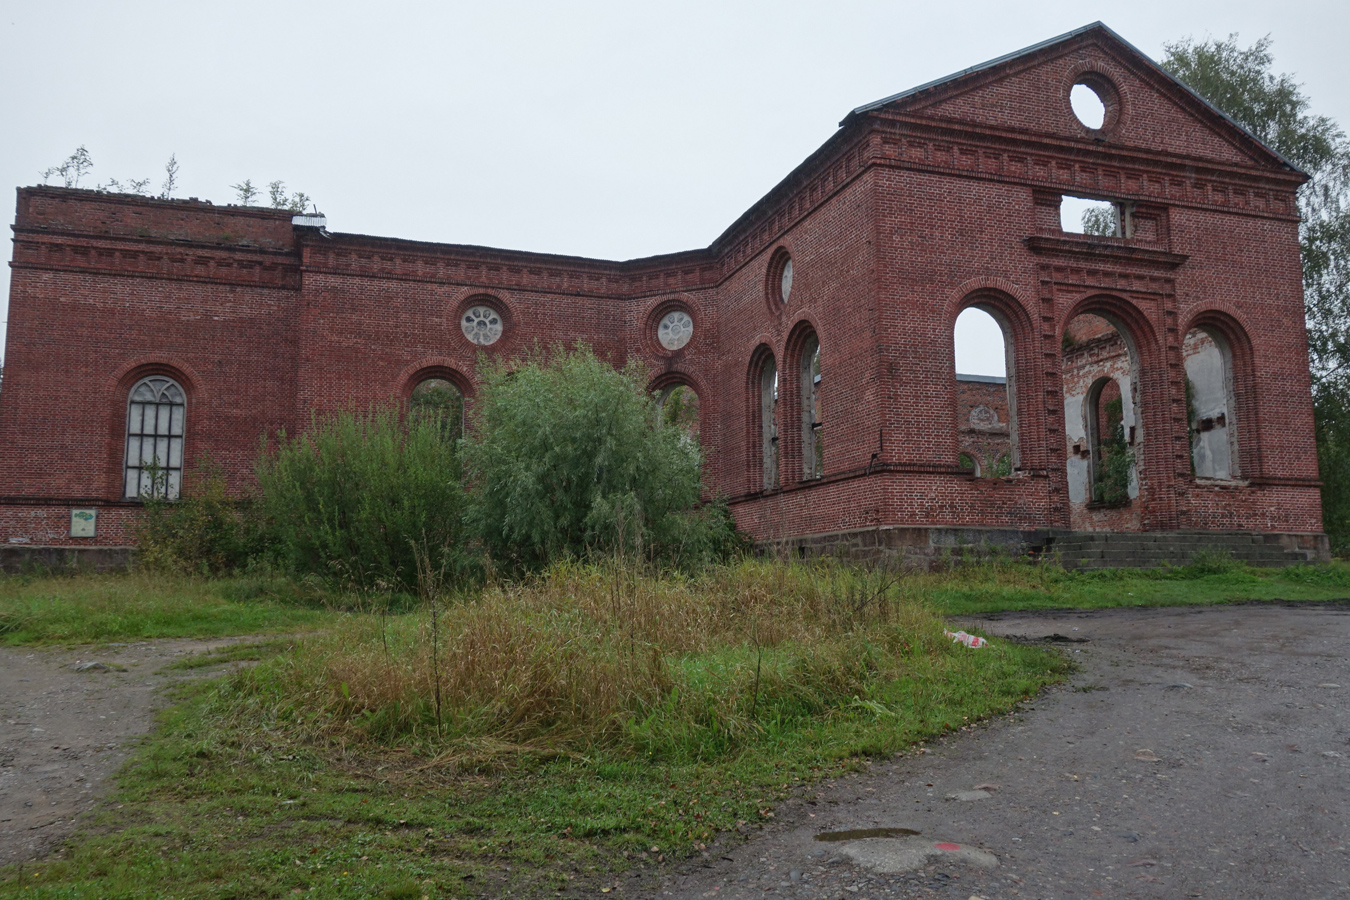 August 25, 2016. Ruins of the church